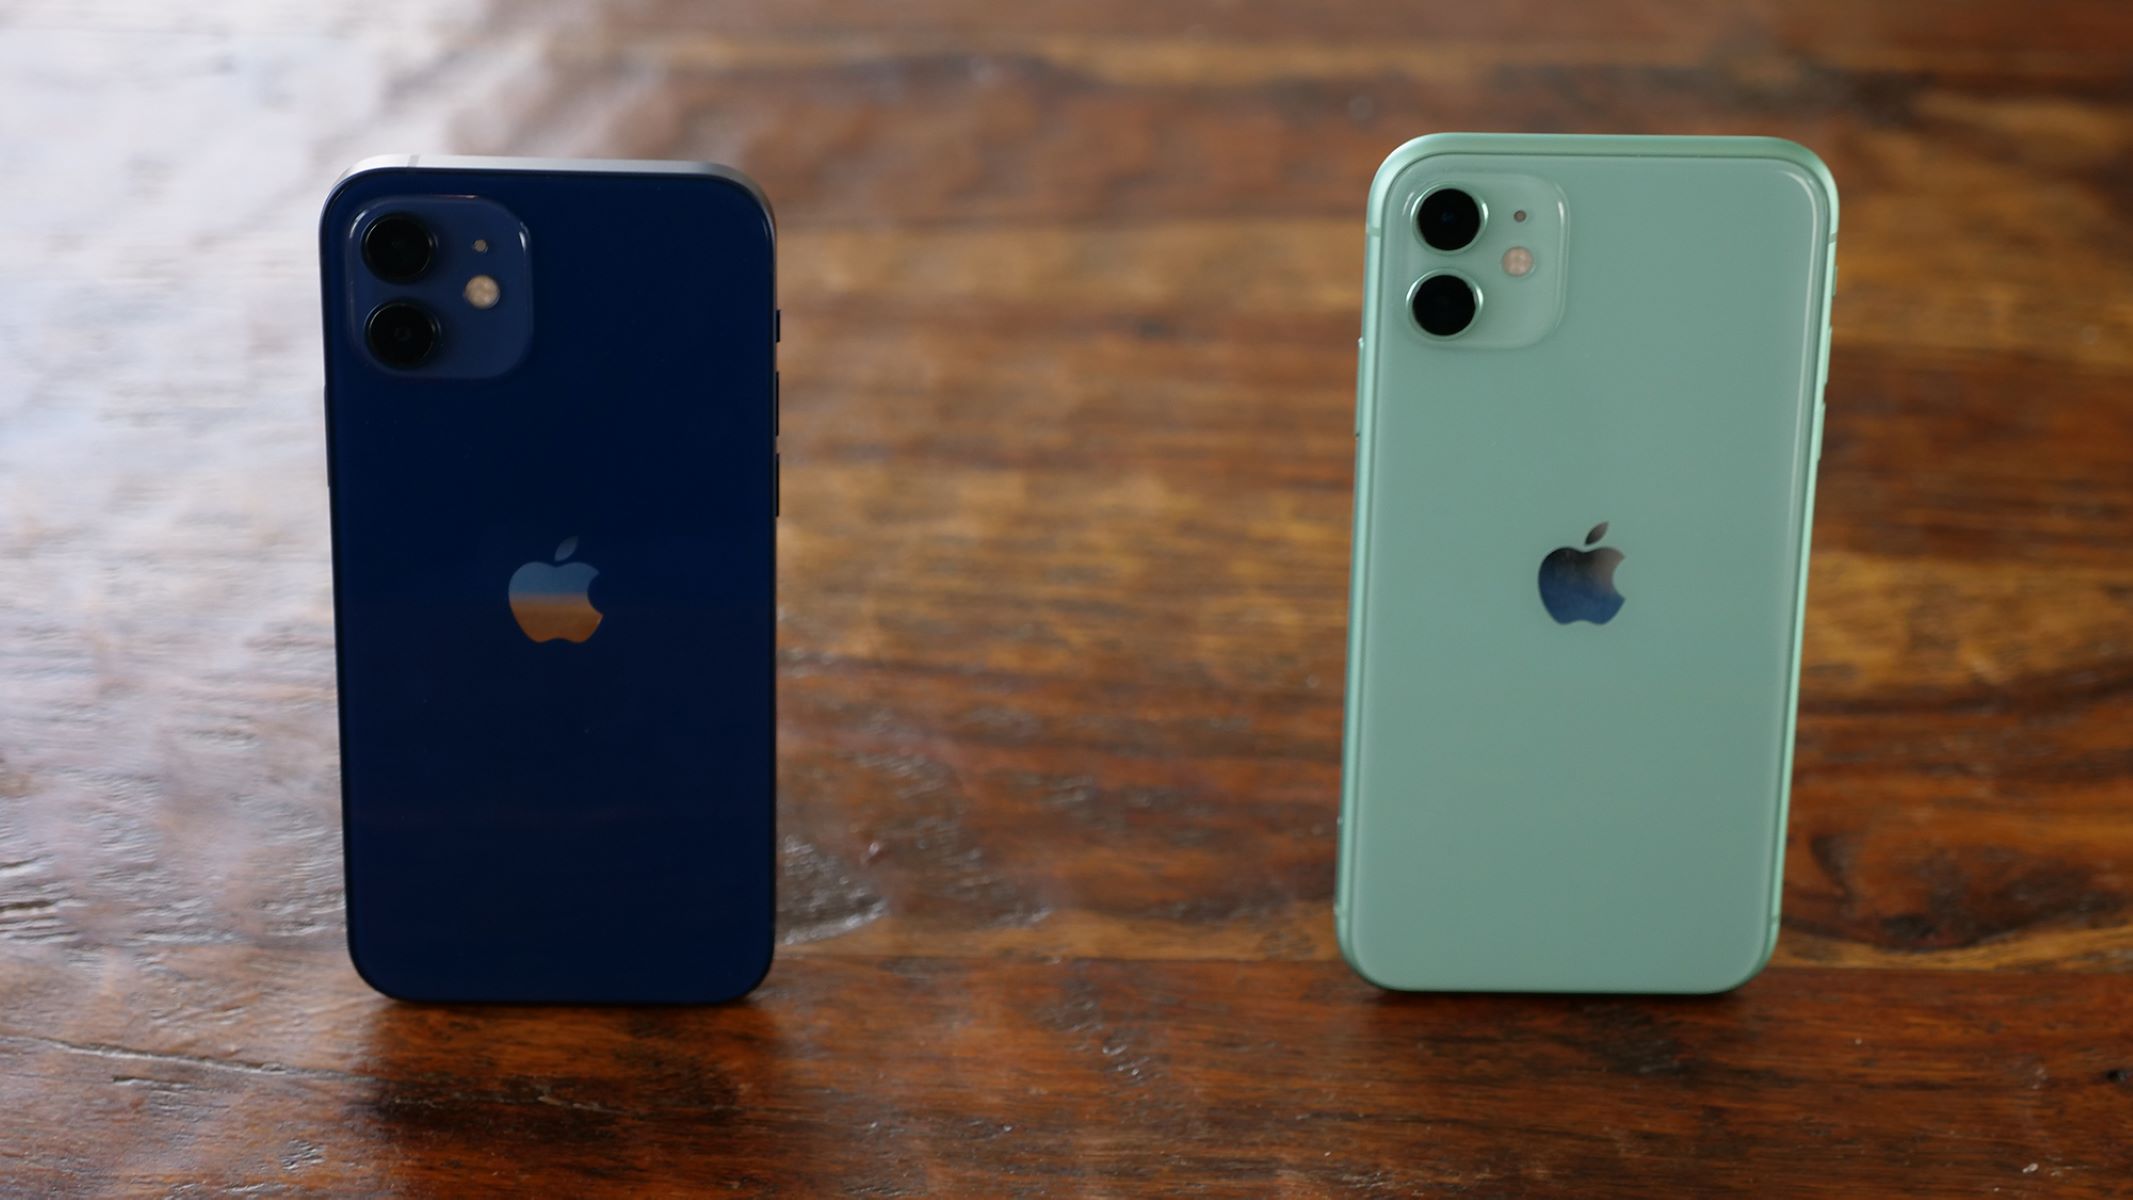 Model Contrast: Highlighting The Differences Between IPhone 11 And IPhone 12